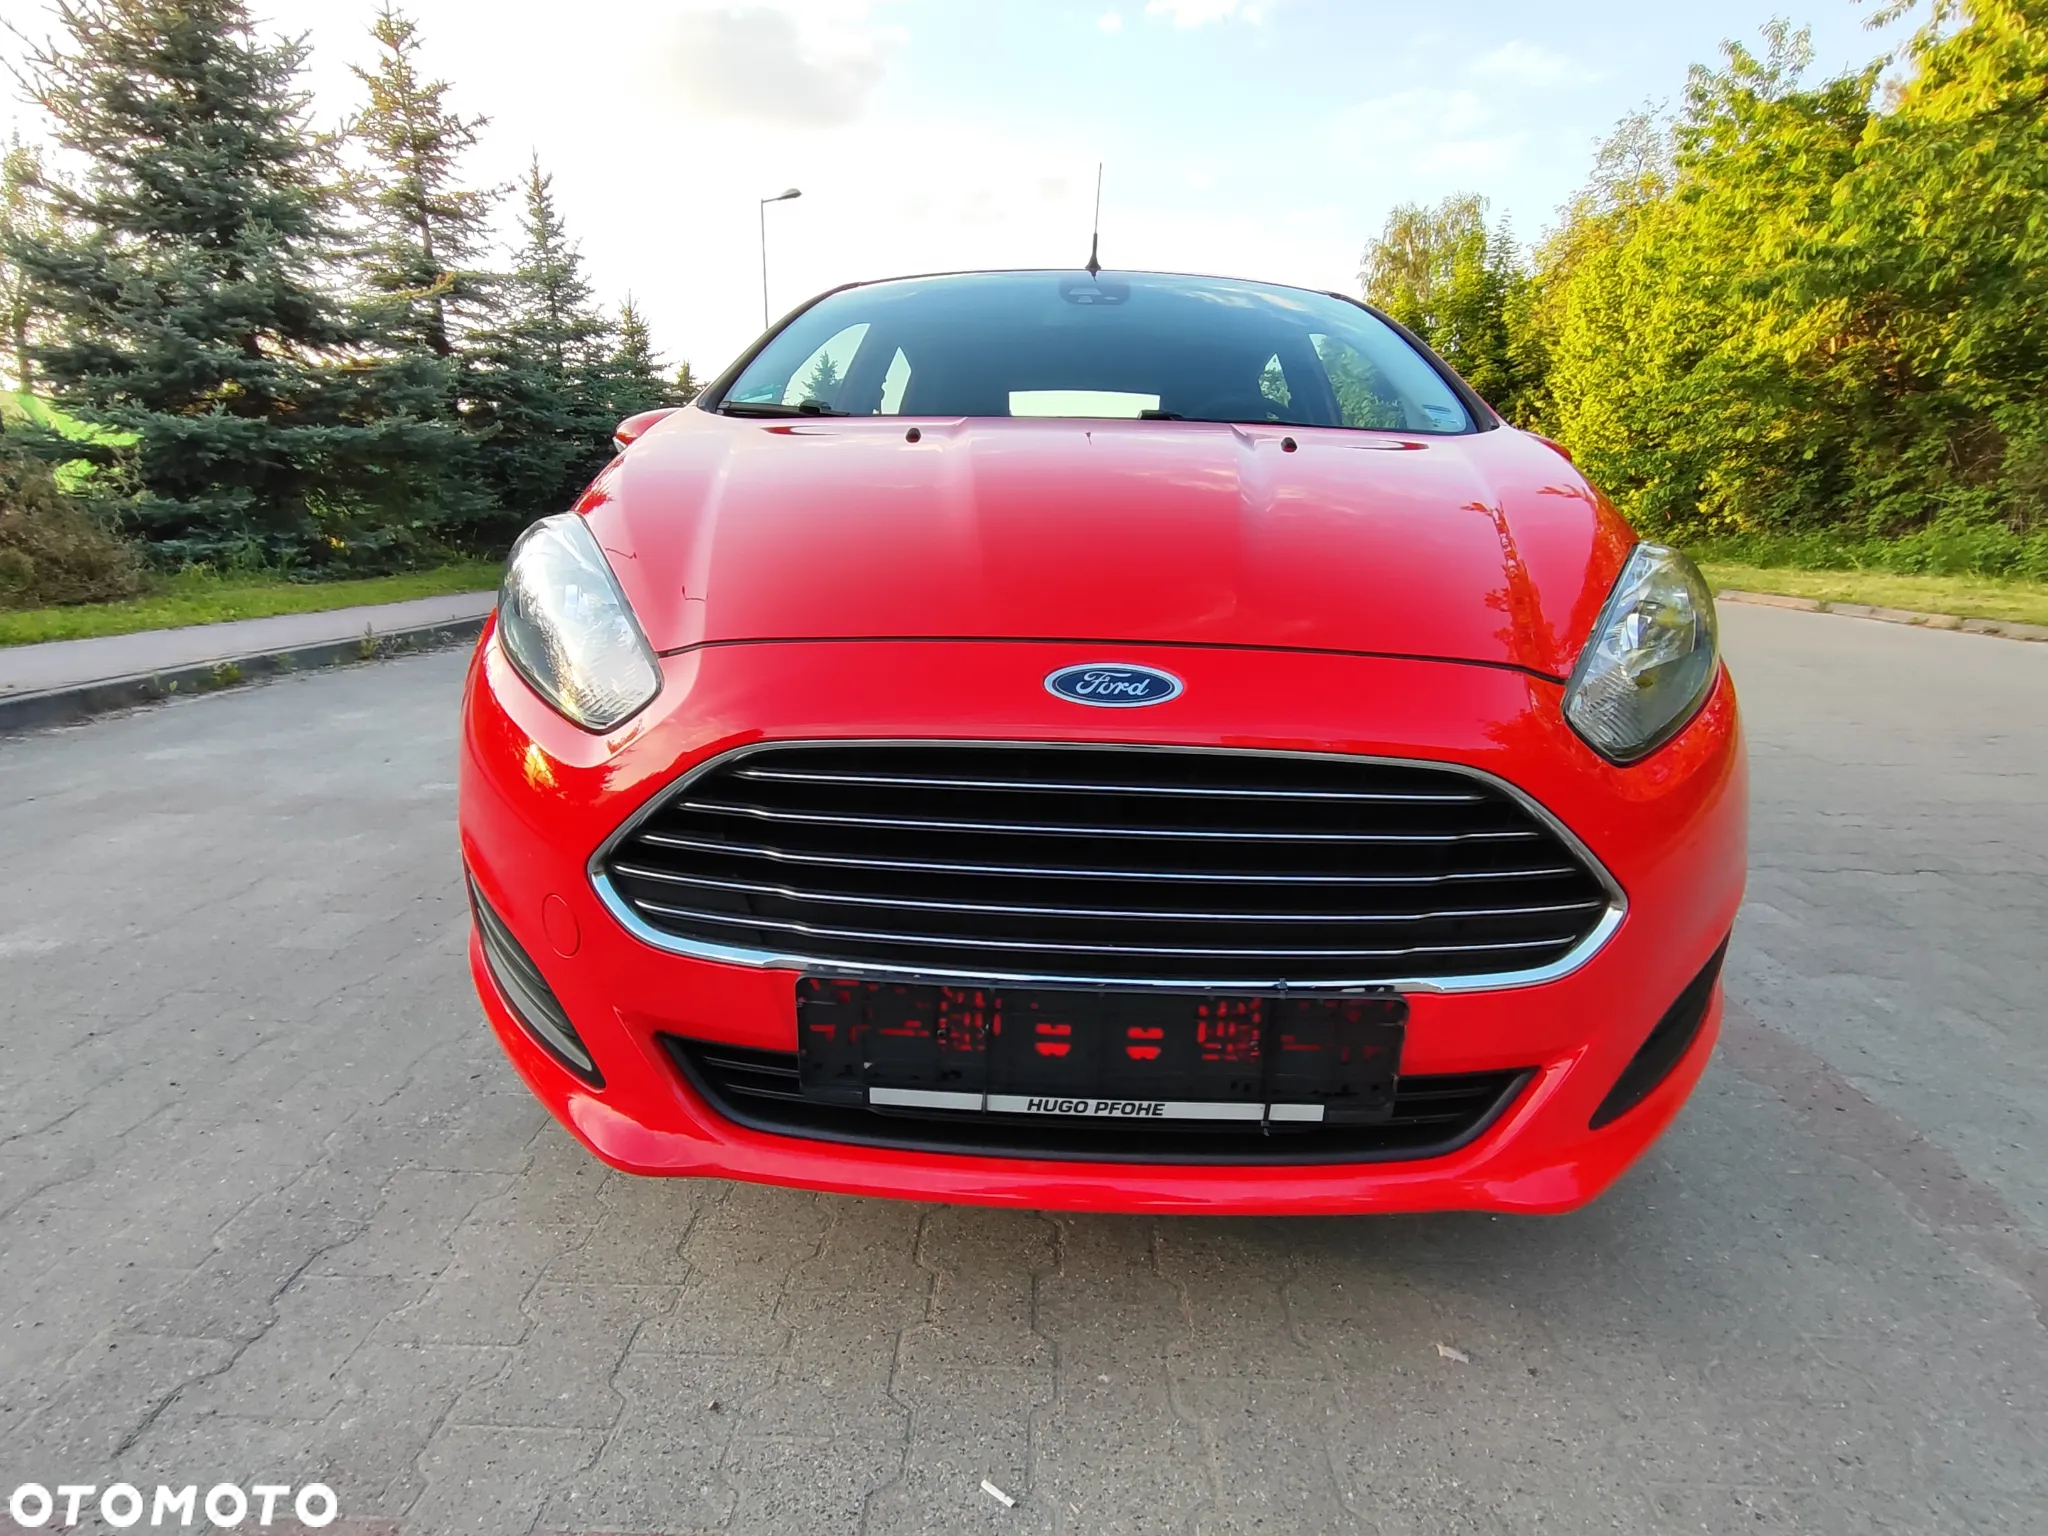 Ford Fiesta 1.0 EcoBoost GPF SYNC Edition ASS - 7